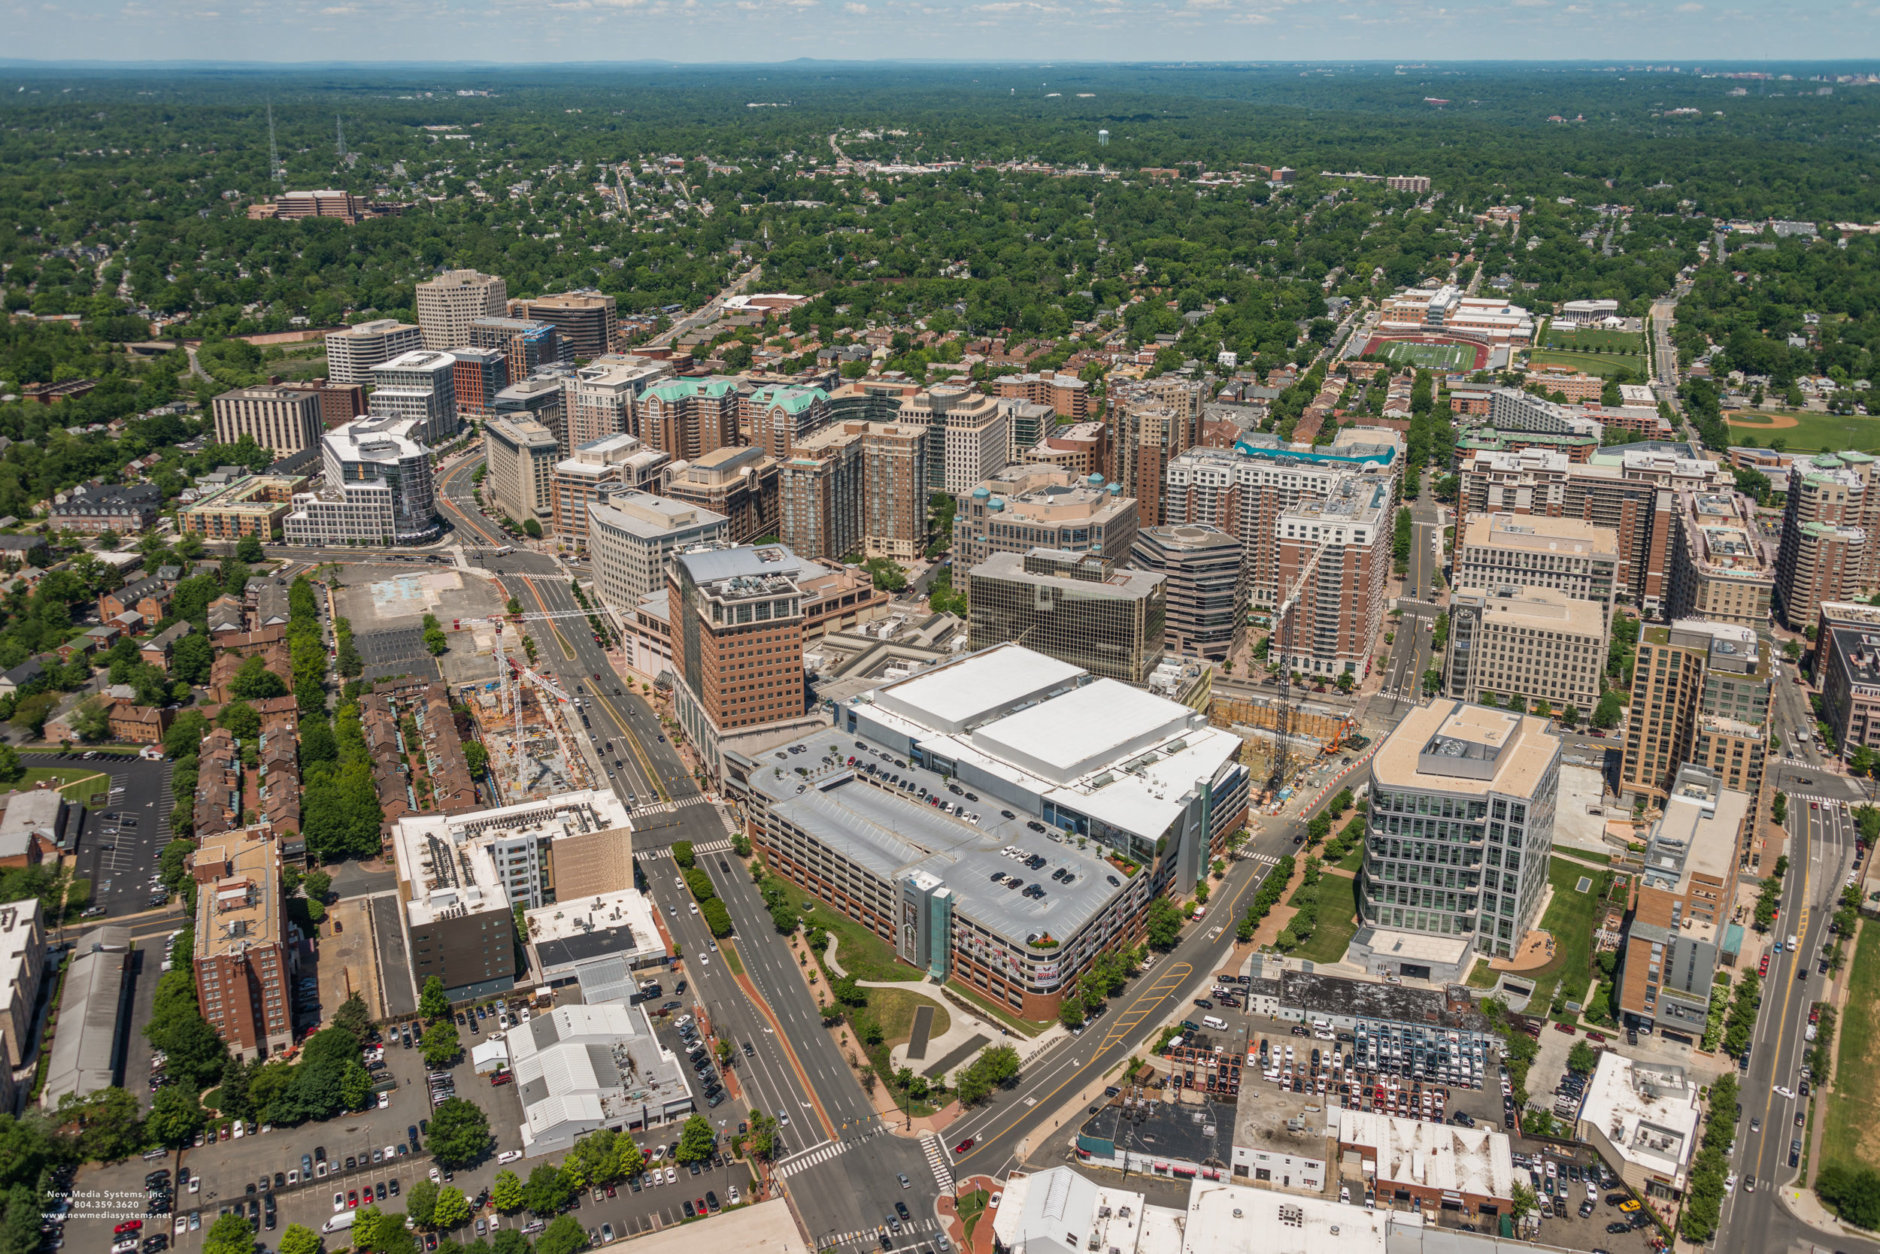 A rendering of the Ballston Quarter redevelopment. (Courtesy Forest City)